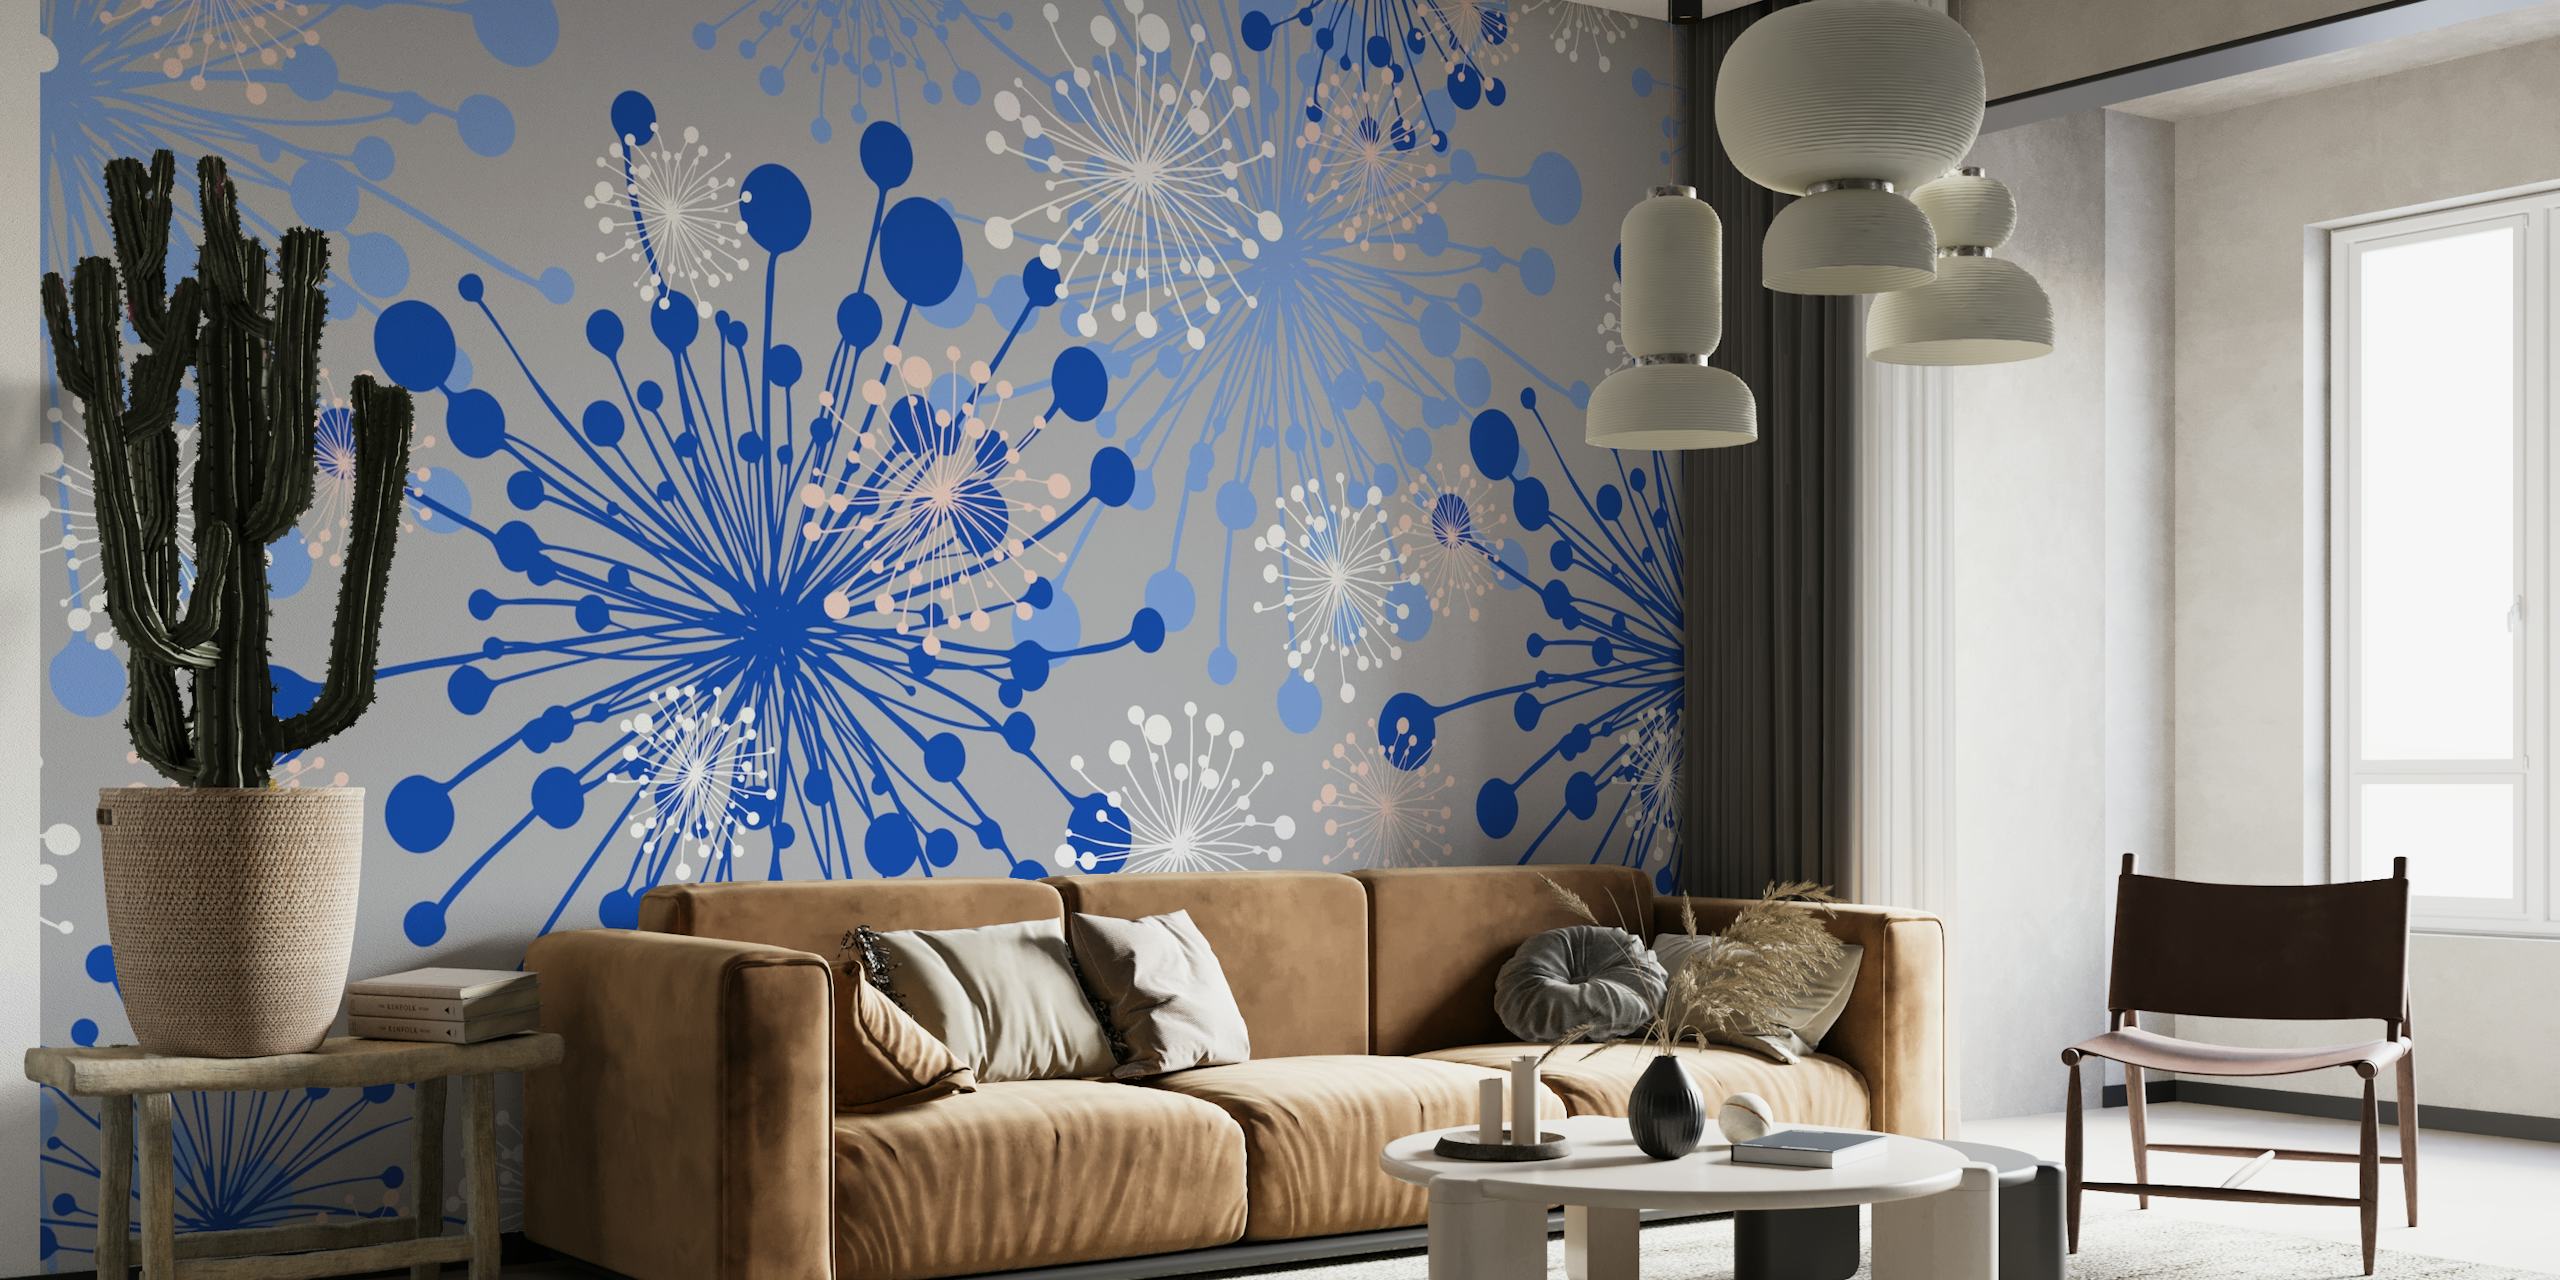 Elegant grey and royal blue dandelion wallpaper creating a lively accent wall